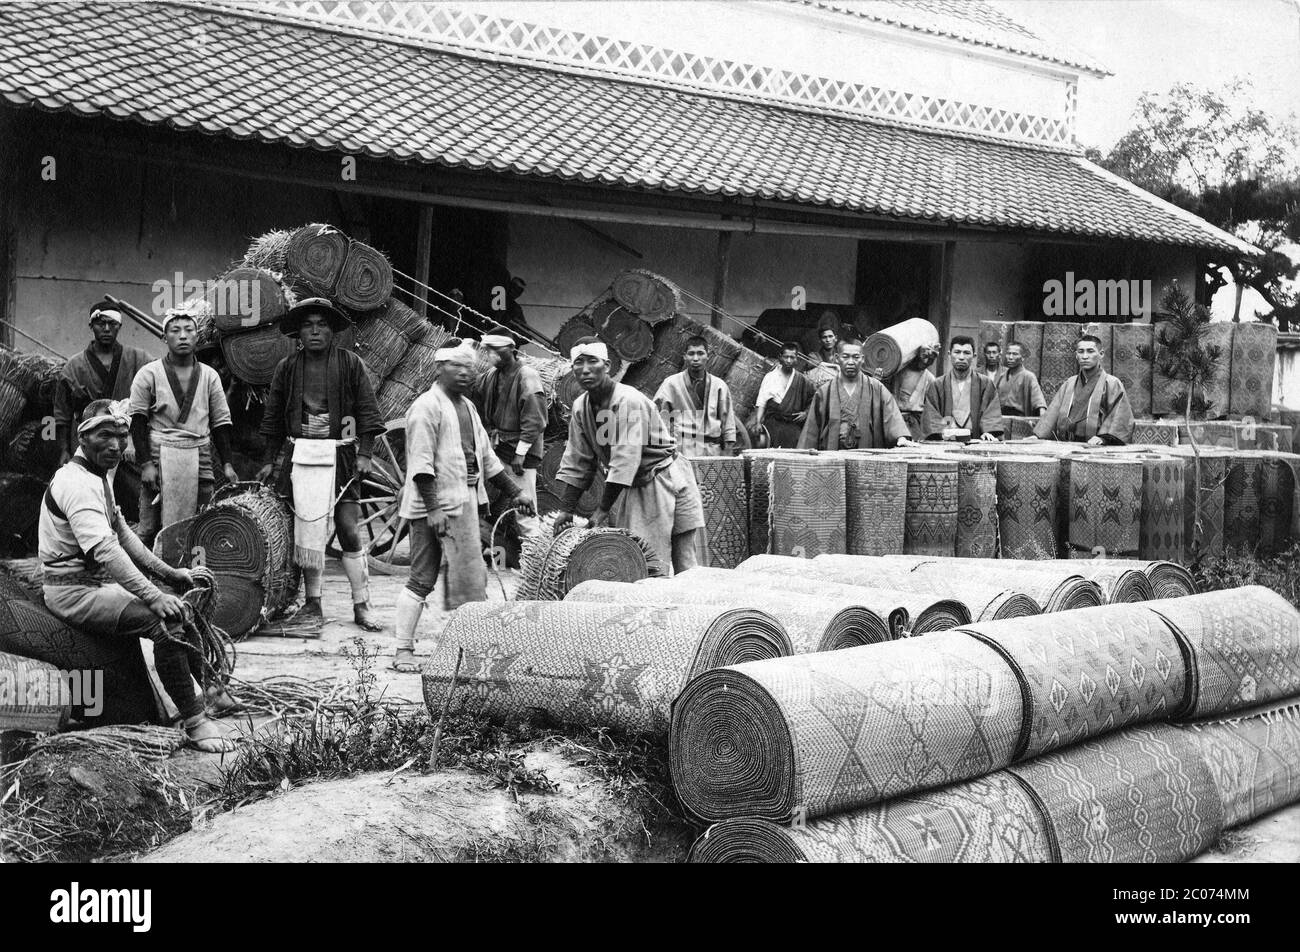 [ 1920s Japan - Packing Straw Matting ] — Workers packing matting made of rice straw in 1923 (Taisho 12).  Matting like this was in high demand after the Great Kanto Earthquake (Kanto Daishinsai) on September 1 of the same year.  20th century vintage glass negative. Stock Photo